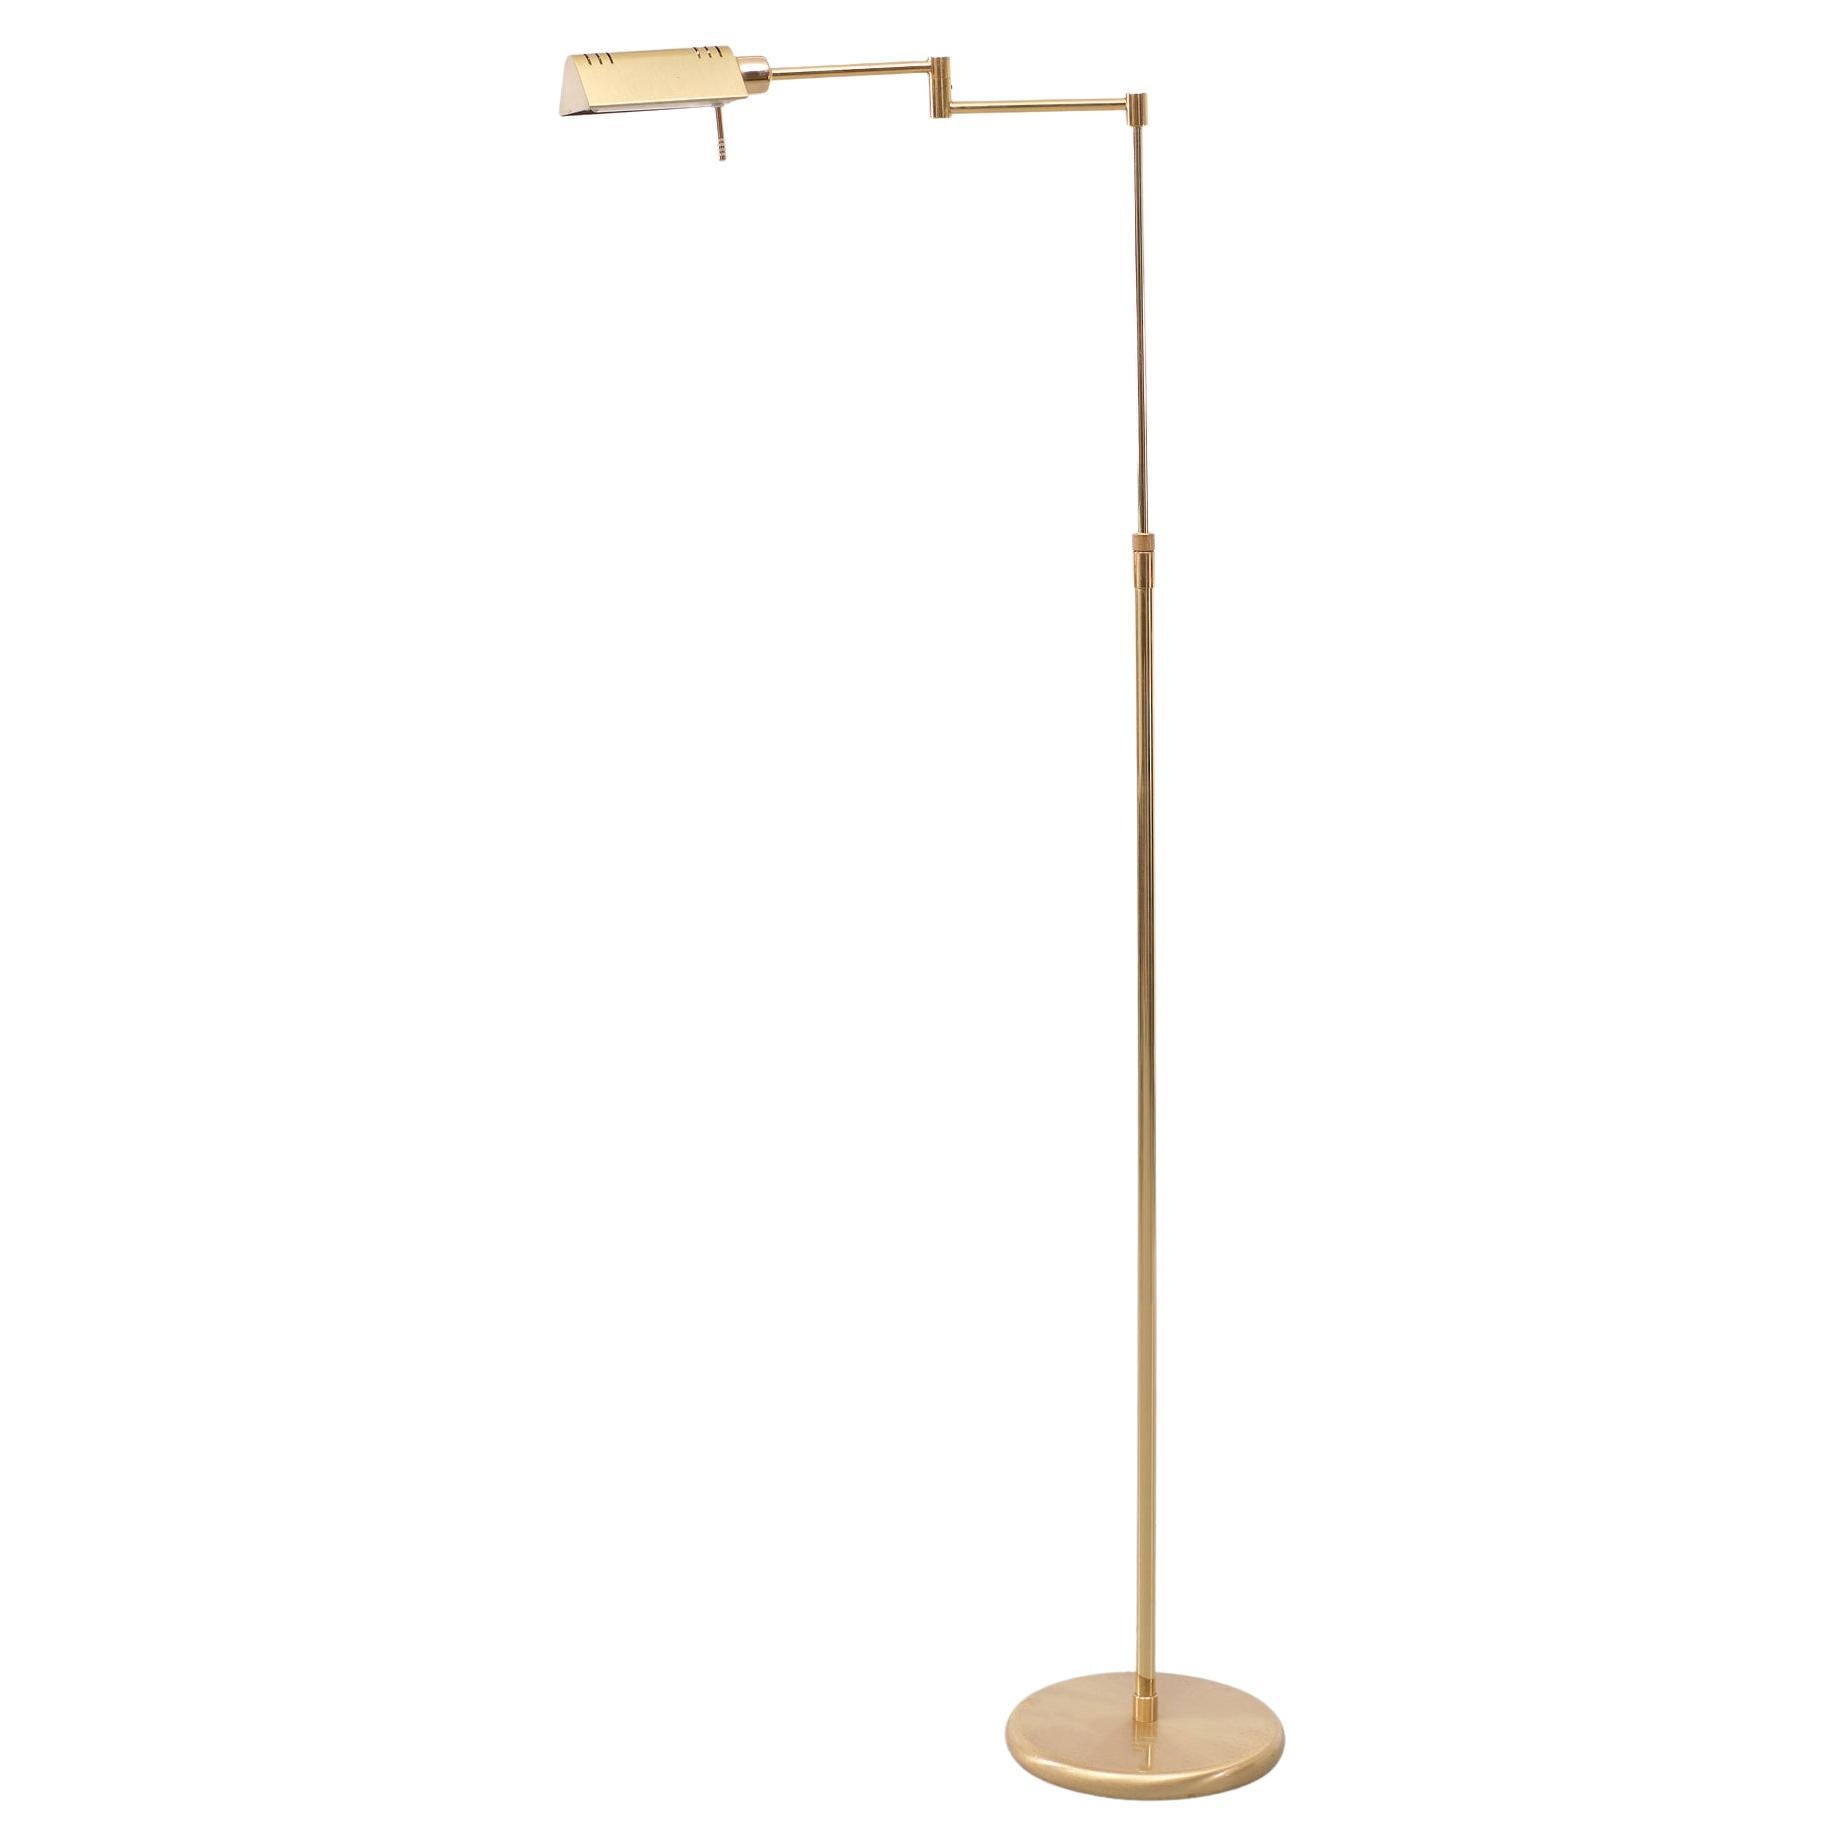 Very nice Brass floor lamp. Adjustable in height. 100 cm /144 cm Halogen, comes with 
a good working dimmer. Manufactured by Höltkotter Germany 1970s. 
Good quality lamp. Good condition.